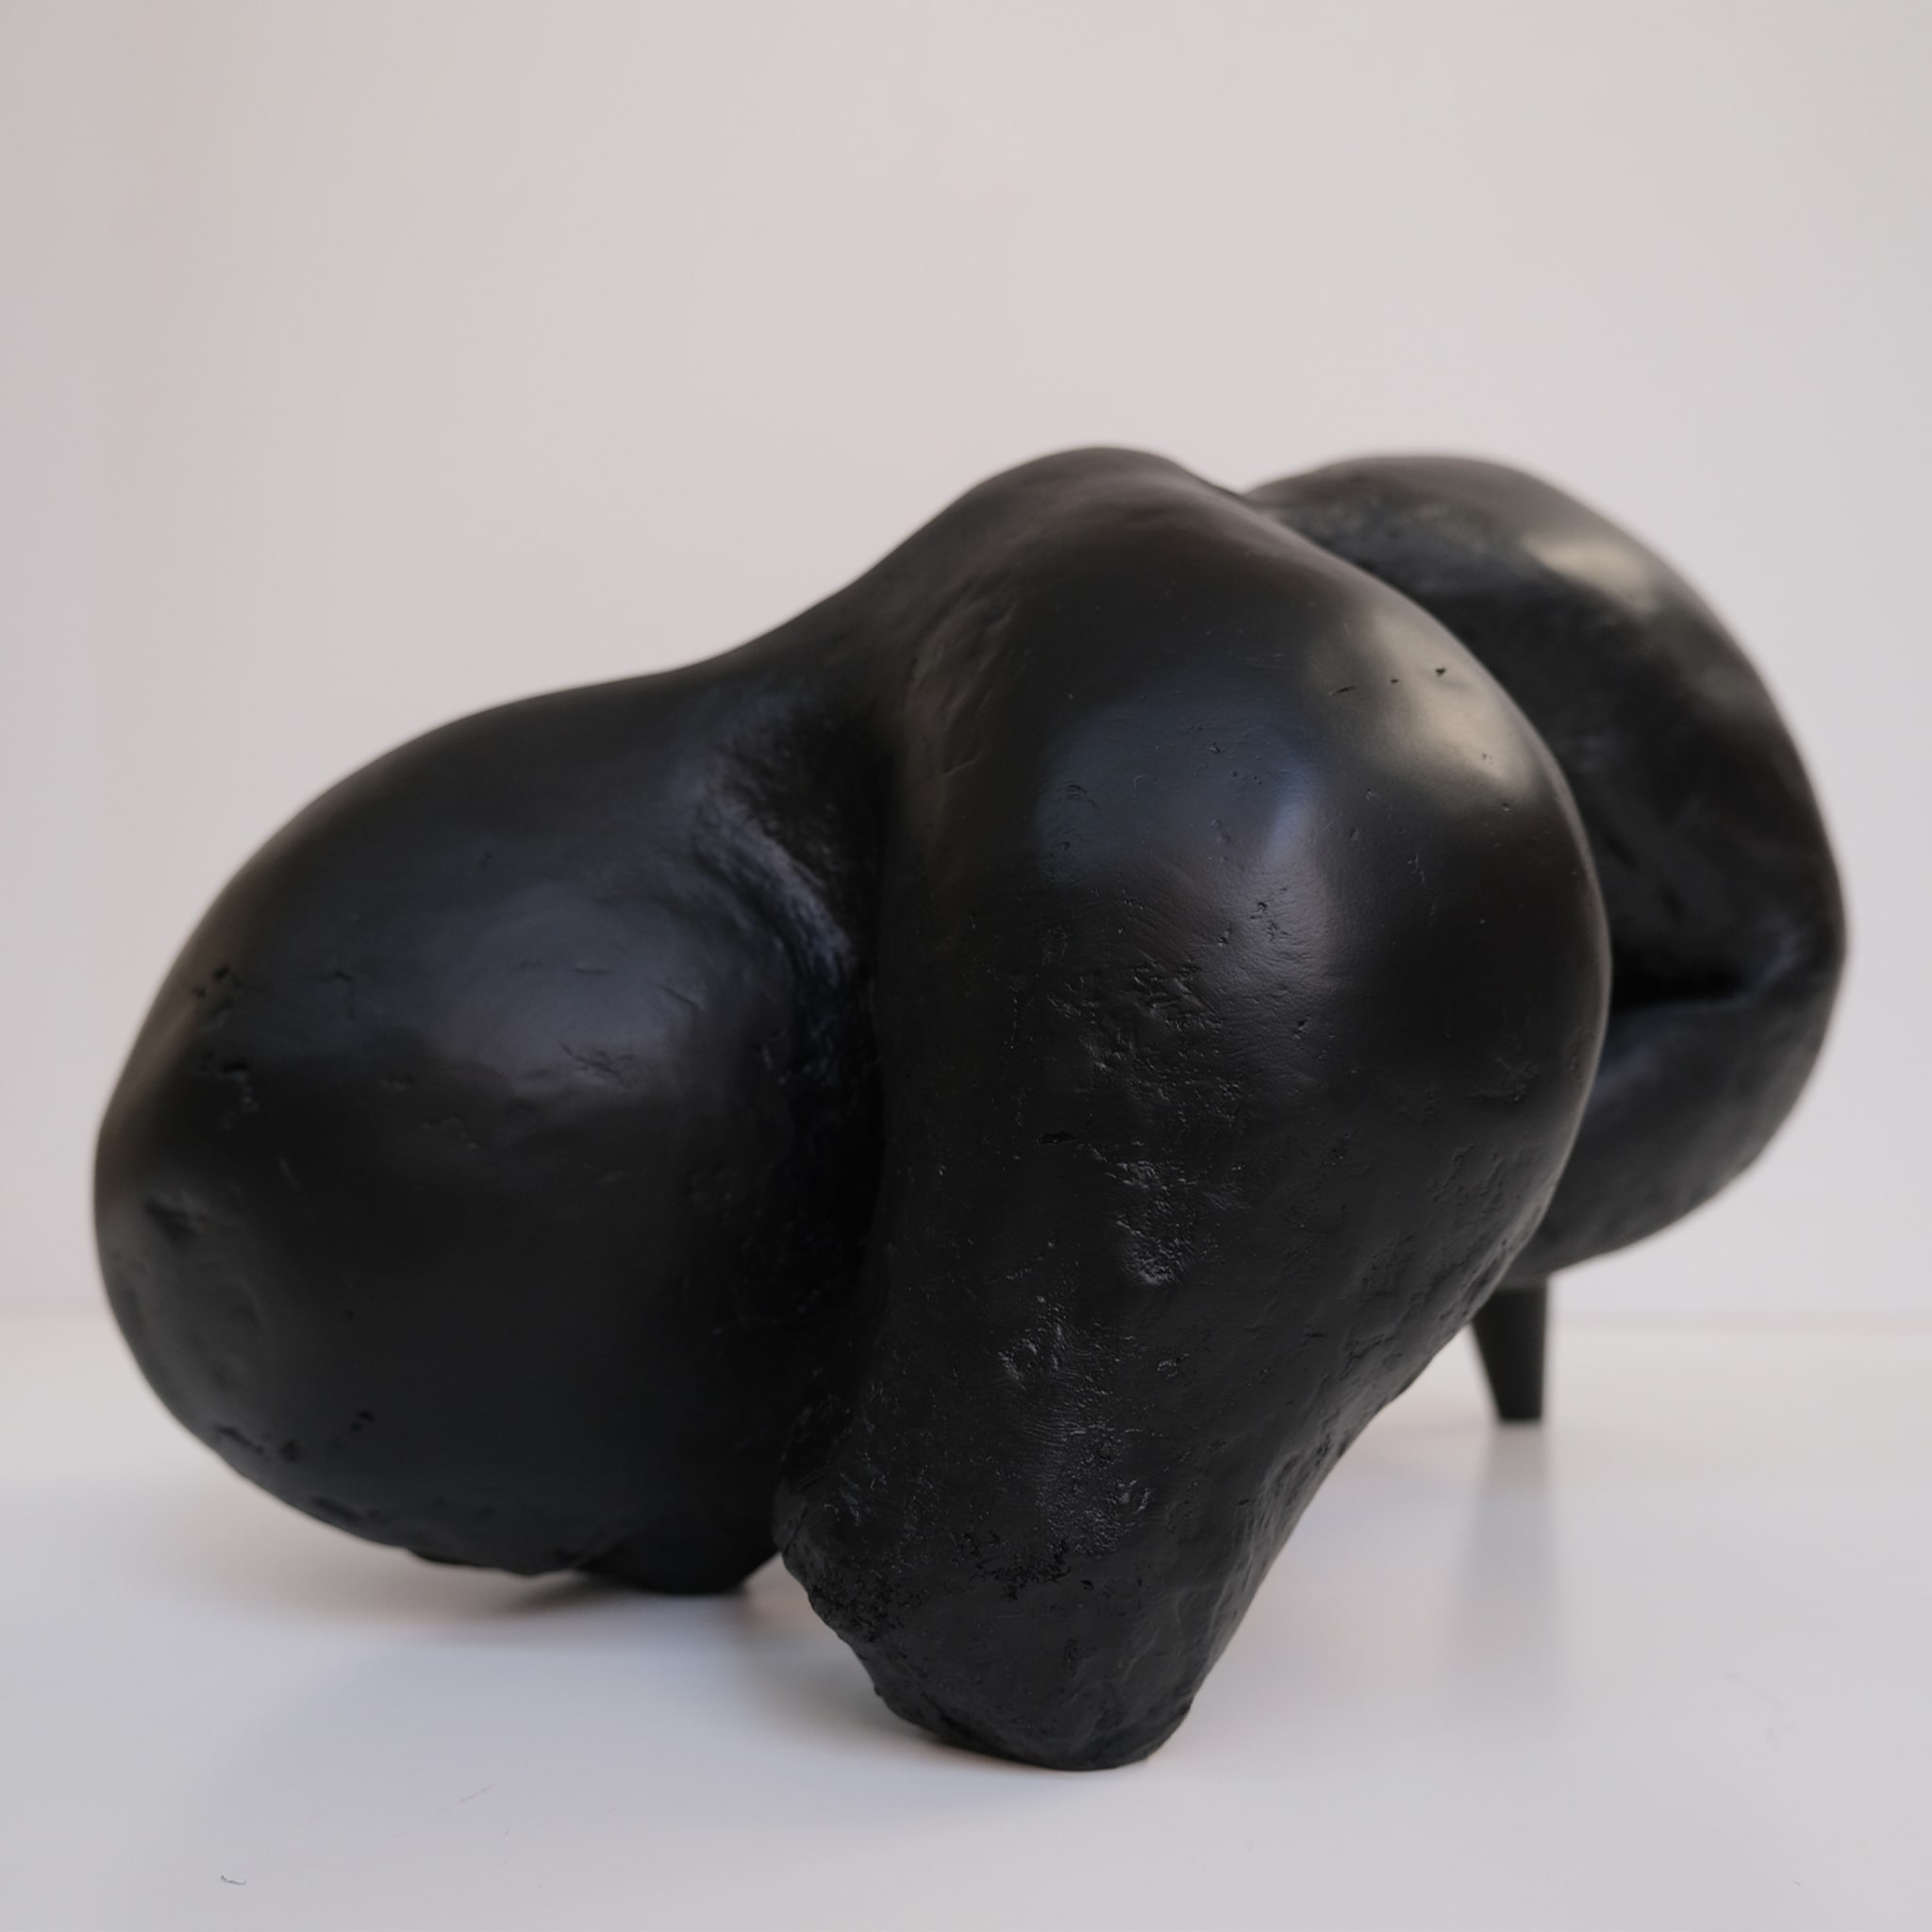 Hungry Sculpture - Alternative view 3